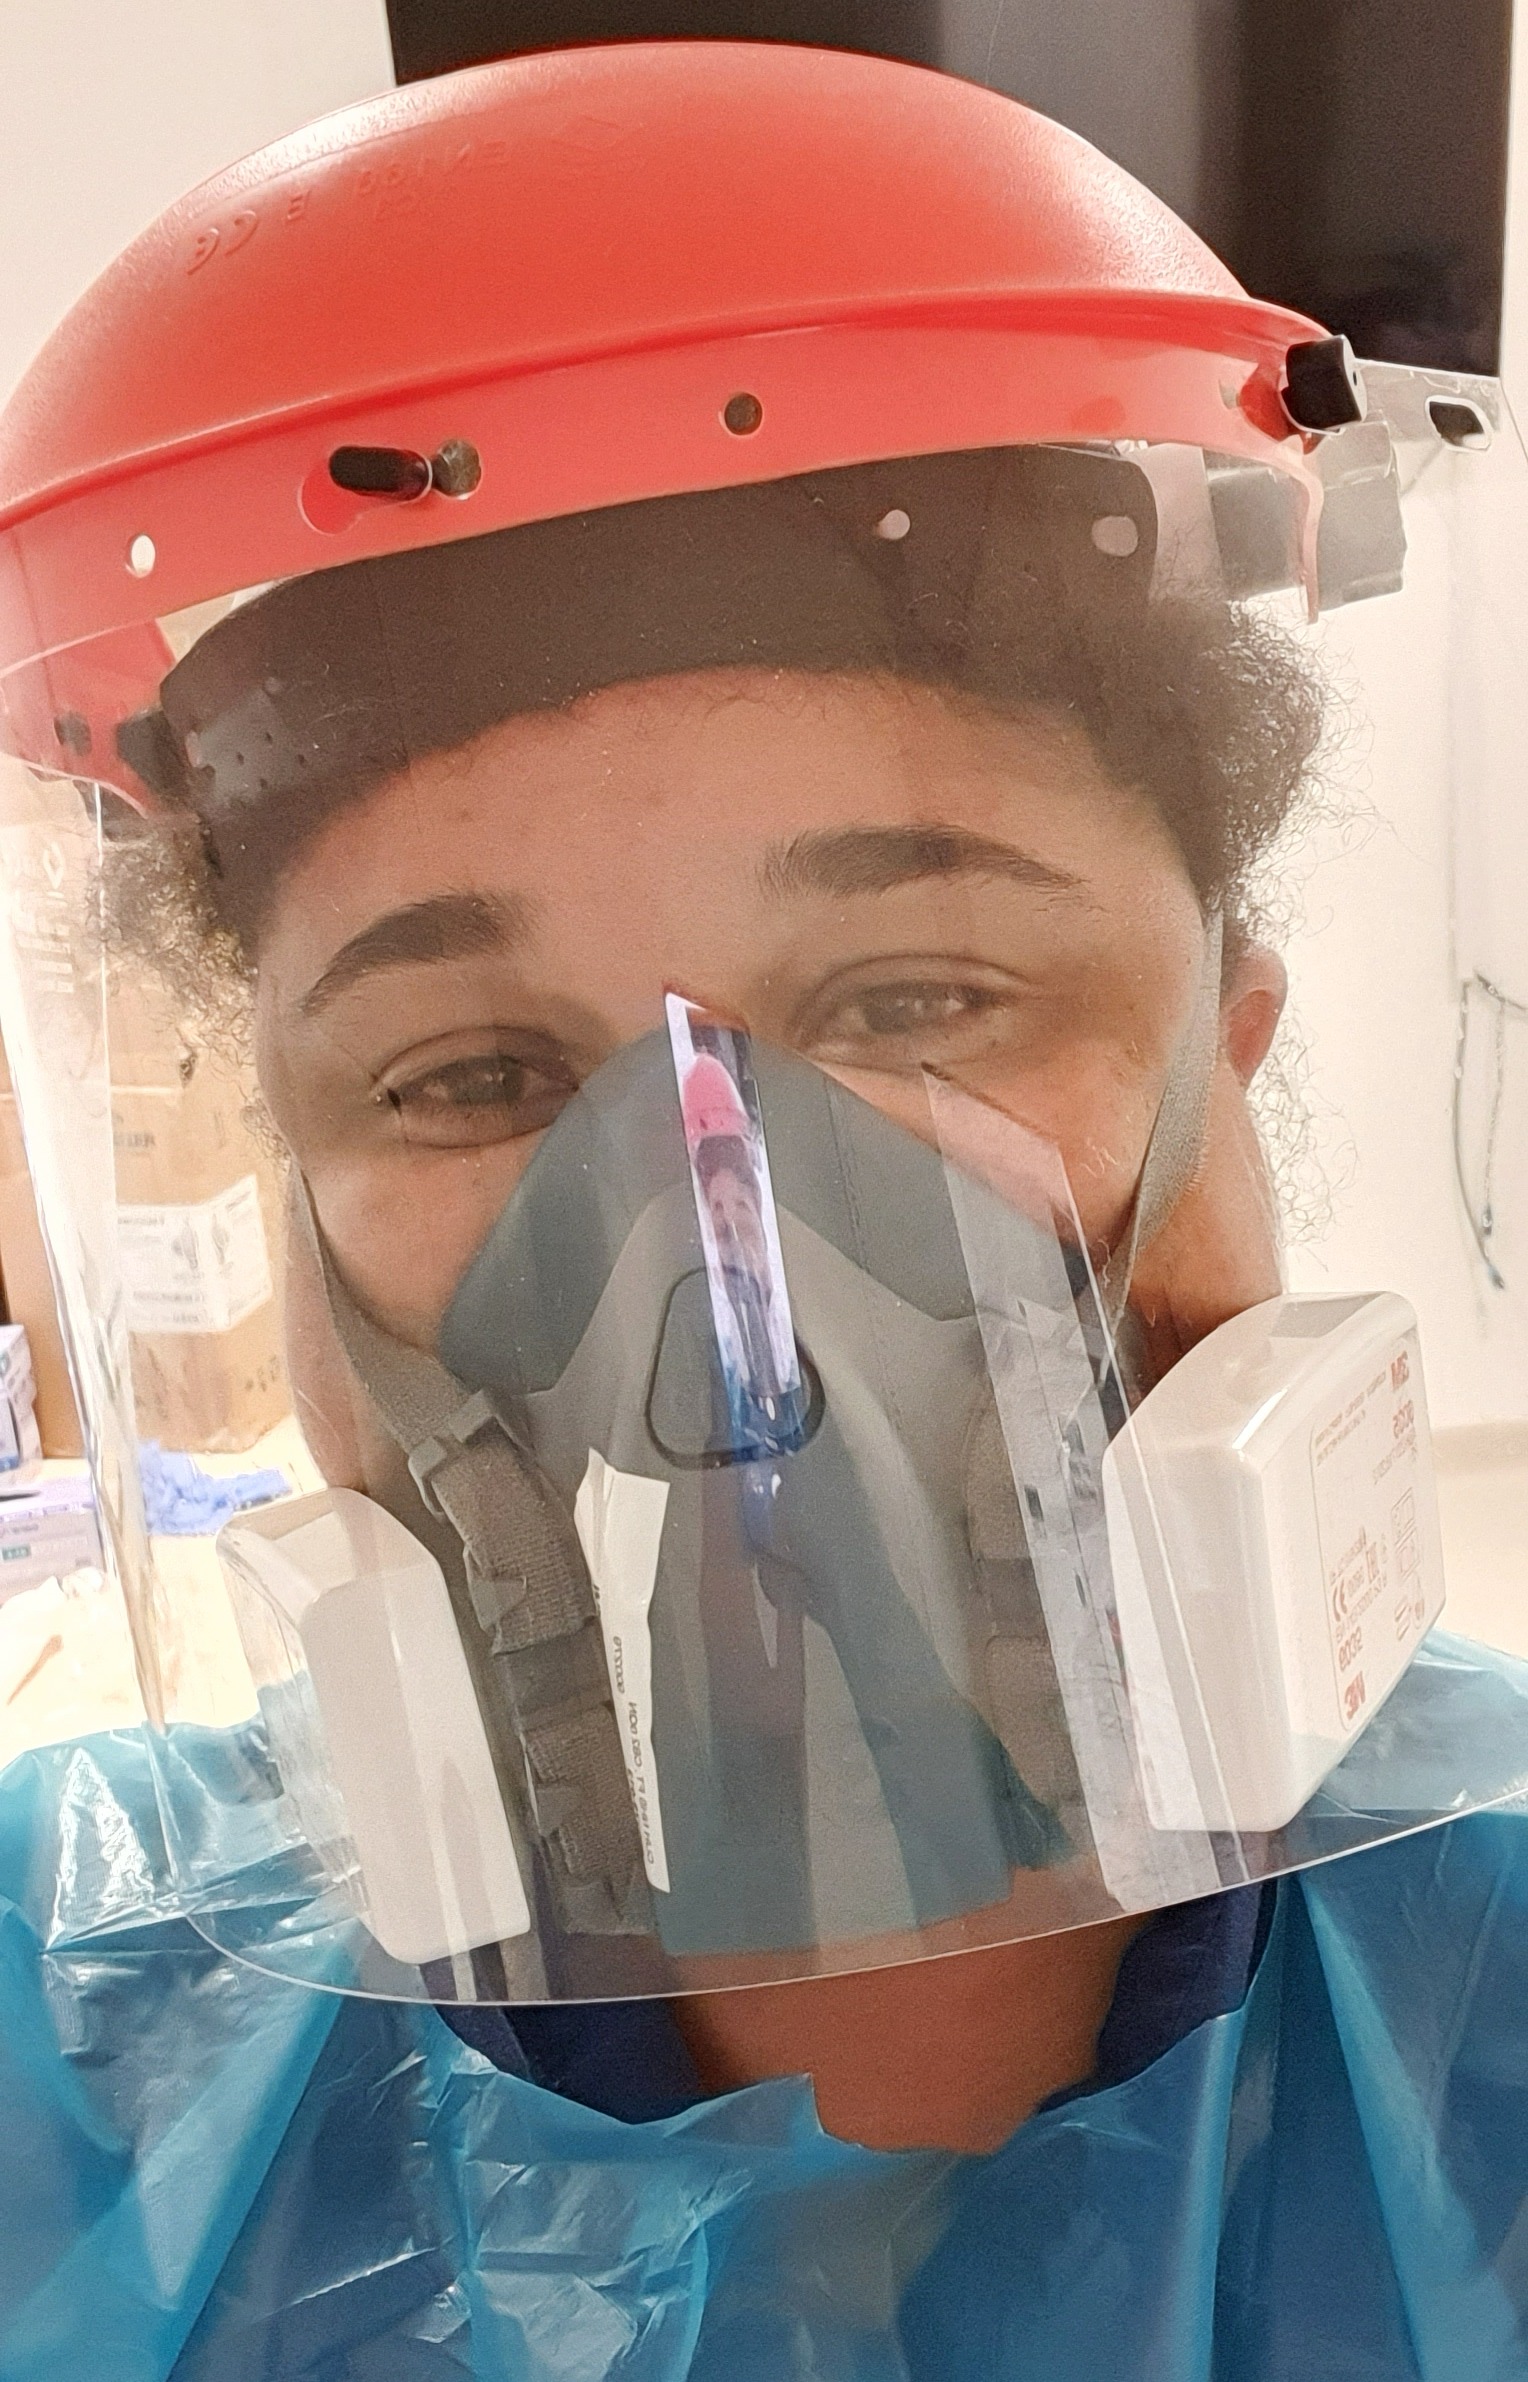 Shorai in full PPE, with a face visor, mask and gown.